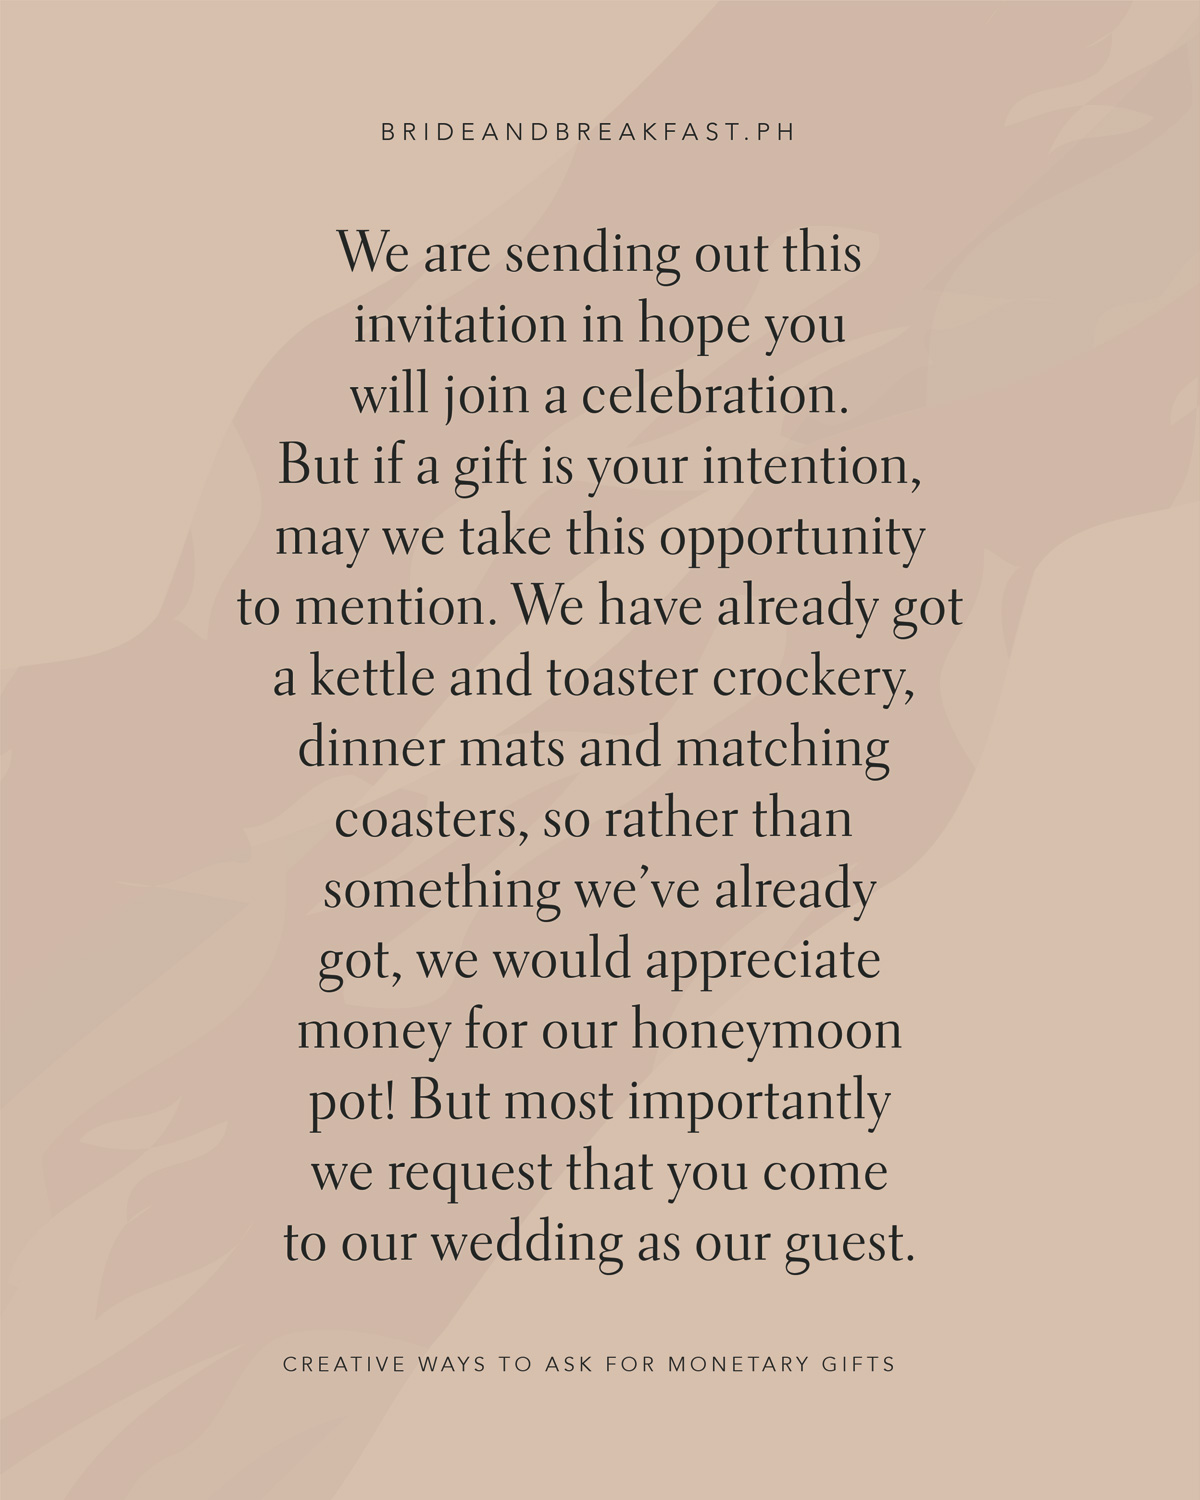 We are sending out this invitation In hope you will join a celebration But if a gift is your intention May we take this opportunity to mention We have already got a kettle and toaster crockery, dinner mats and matching coasters So rather than something we’ve already got We would appreciate money for our honeymoon pot But most importantly we request That you come to our wedding as our guest.